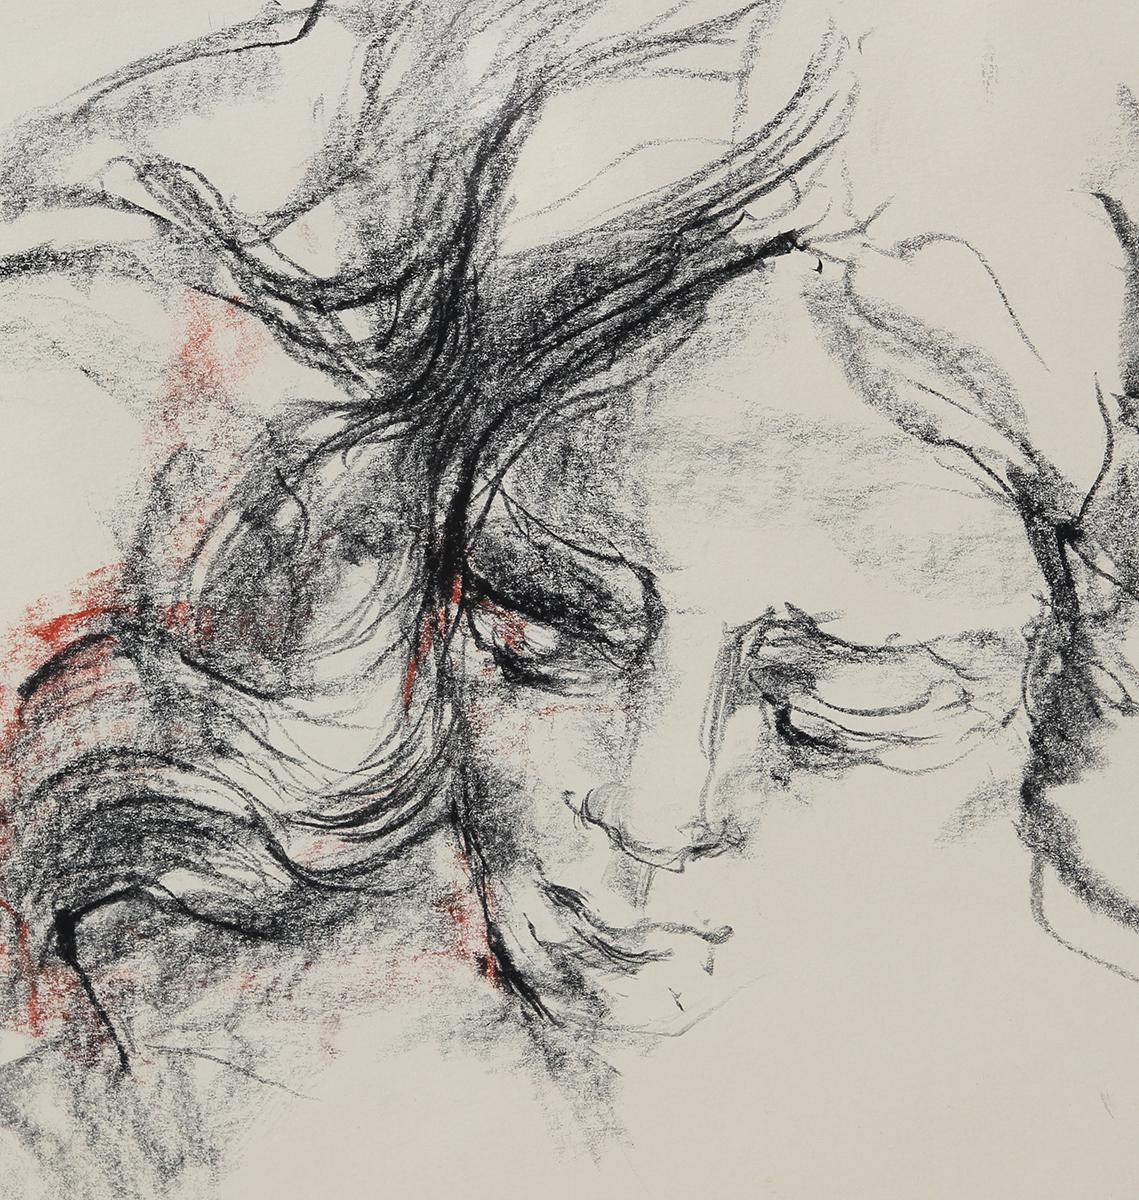 Grayscale abstract charcoal drawing of a lounging female figure. The work features loose, expressive linework with light red accents. Signed in pencil in front lower right corner. Currently hung in a gold frame with complementary linen and burgundy